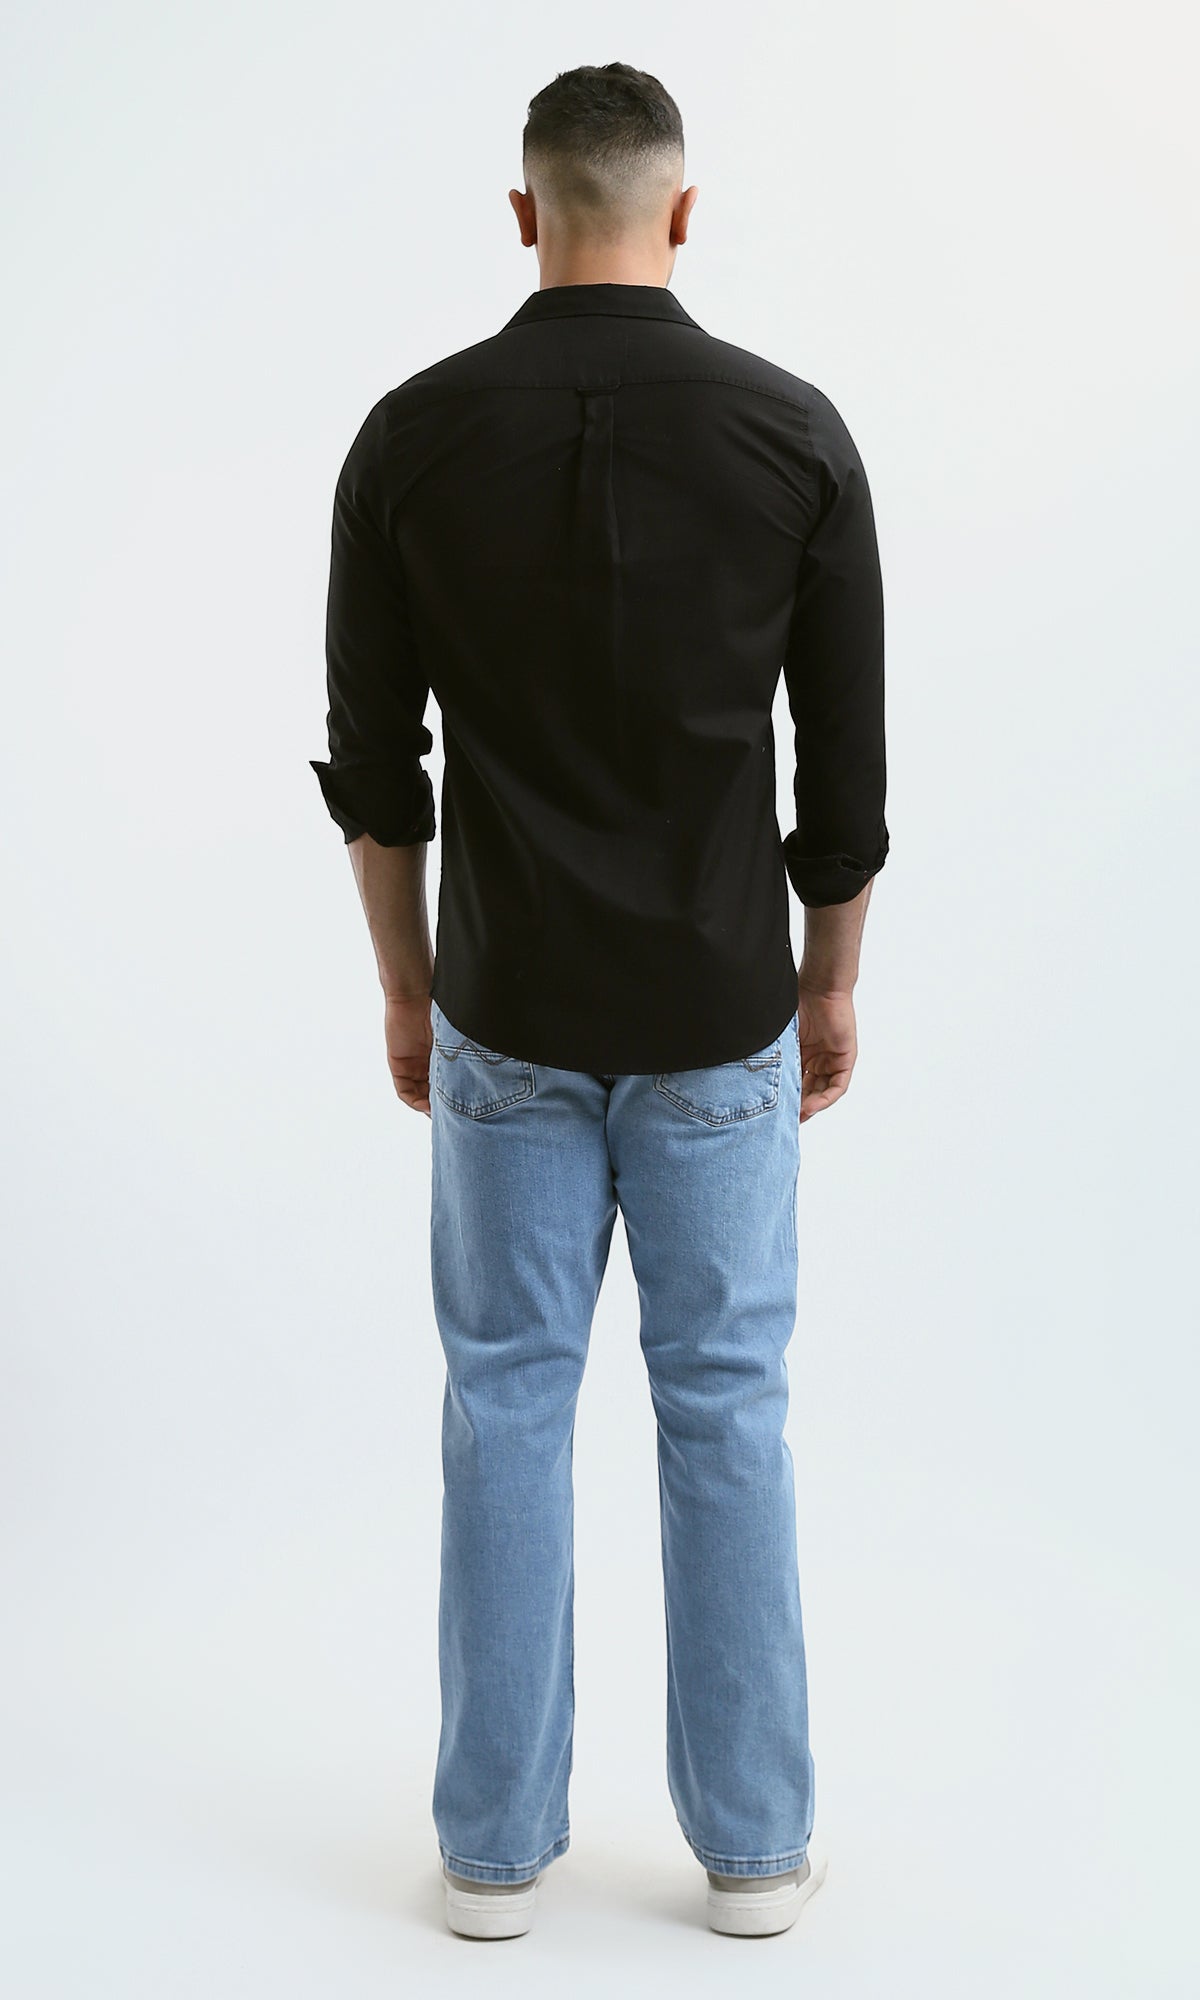 O188530 Solid Long Sleeves Casual Black Buttoned Shirt